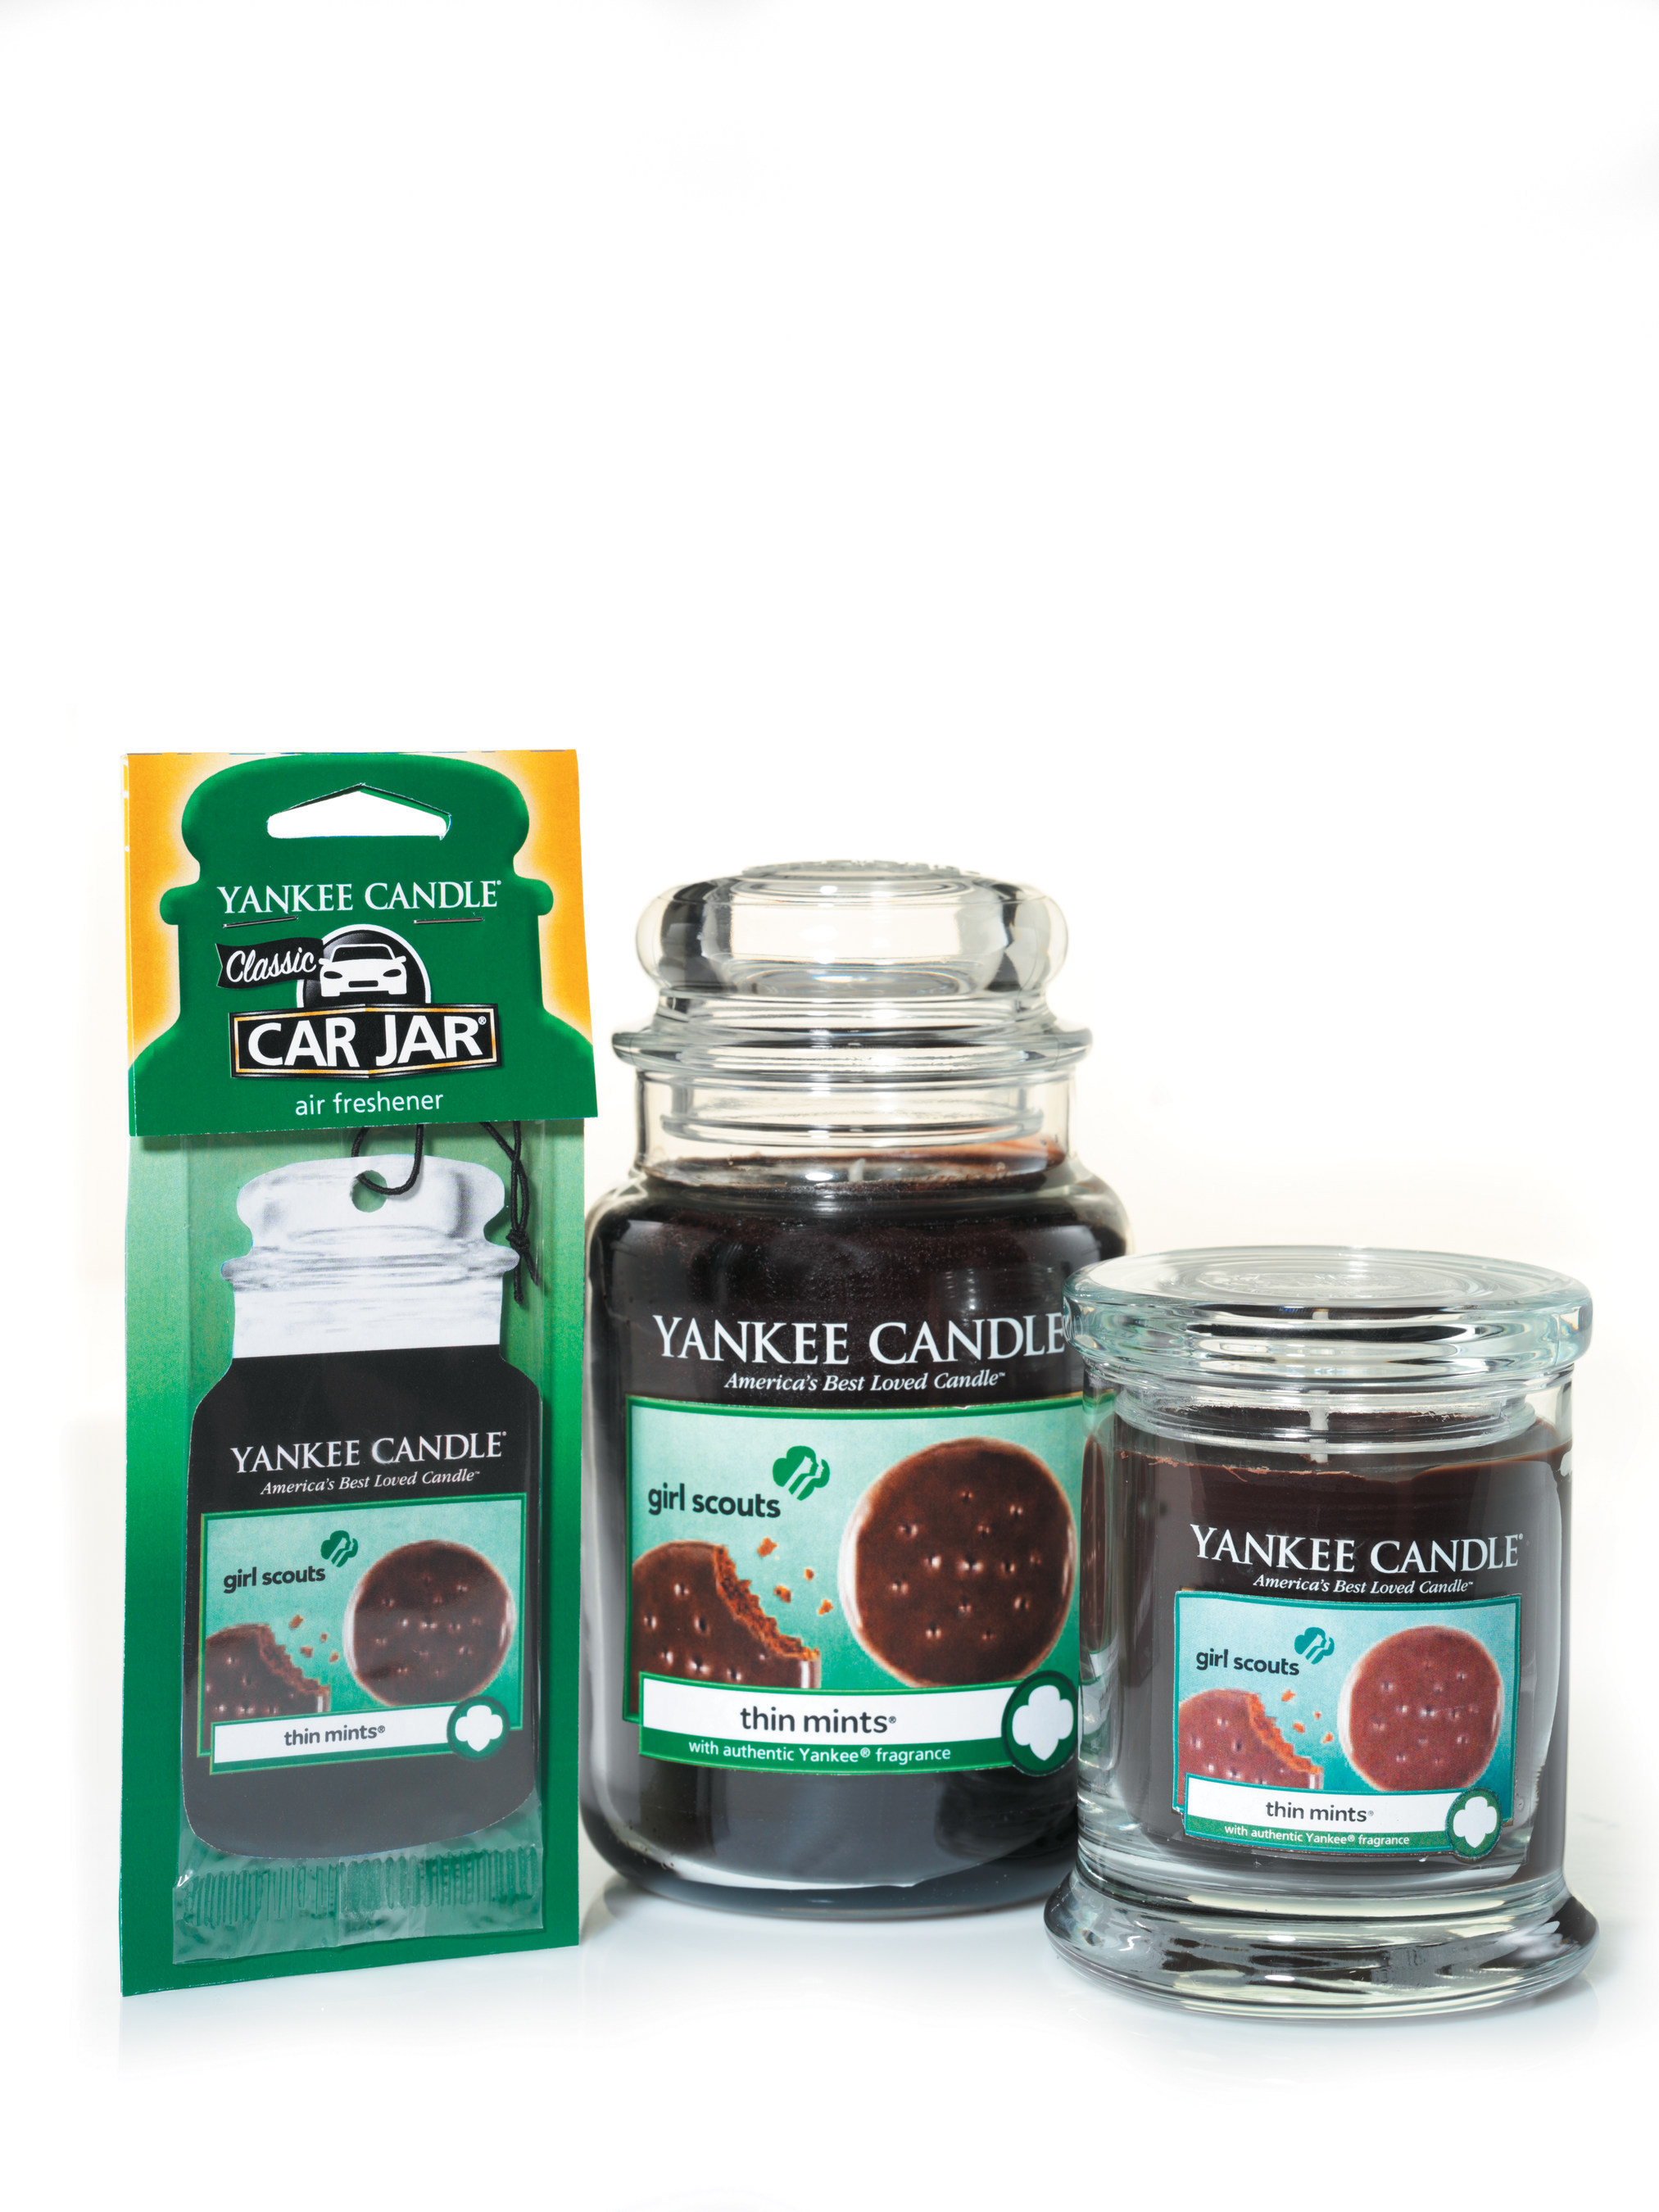 Yankee Candle's new Girl Scout Cookies Limited Edition Candle Collection comes in three different forms: Car Jar Air Freshener, Large Jar Candle and Small Tumbler Candle.